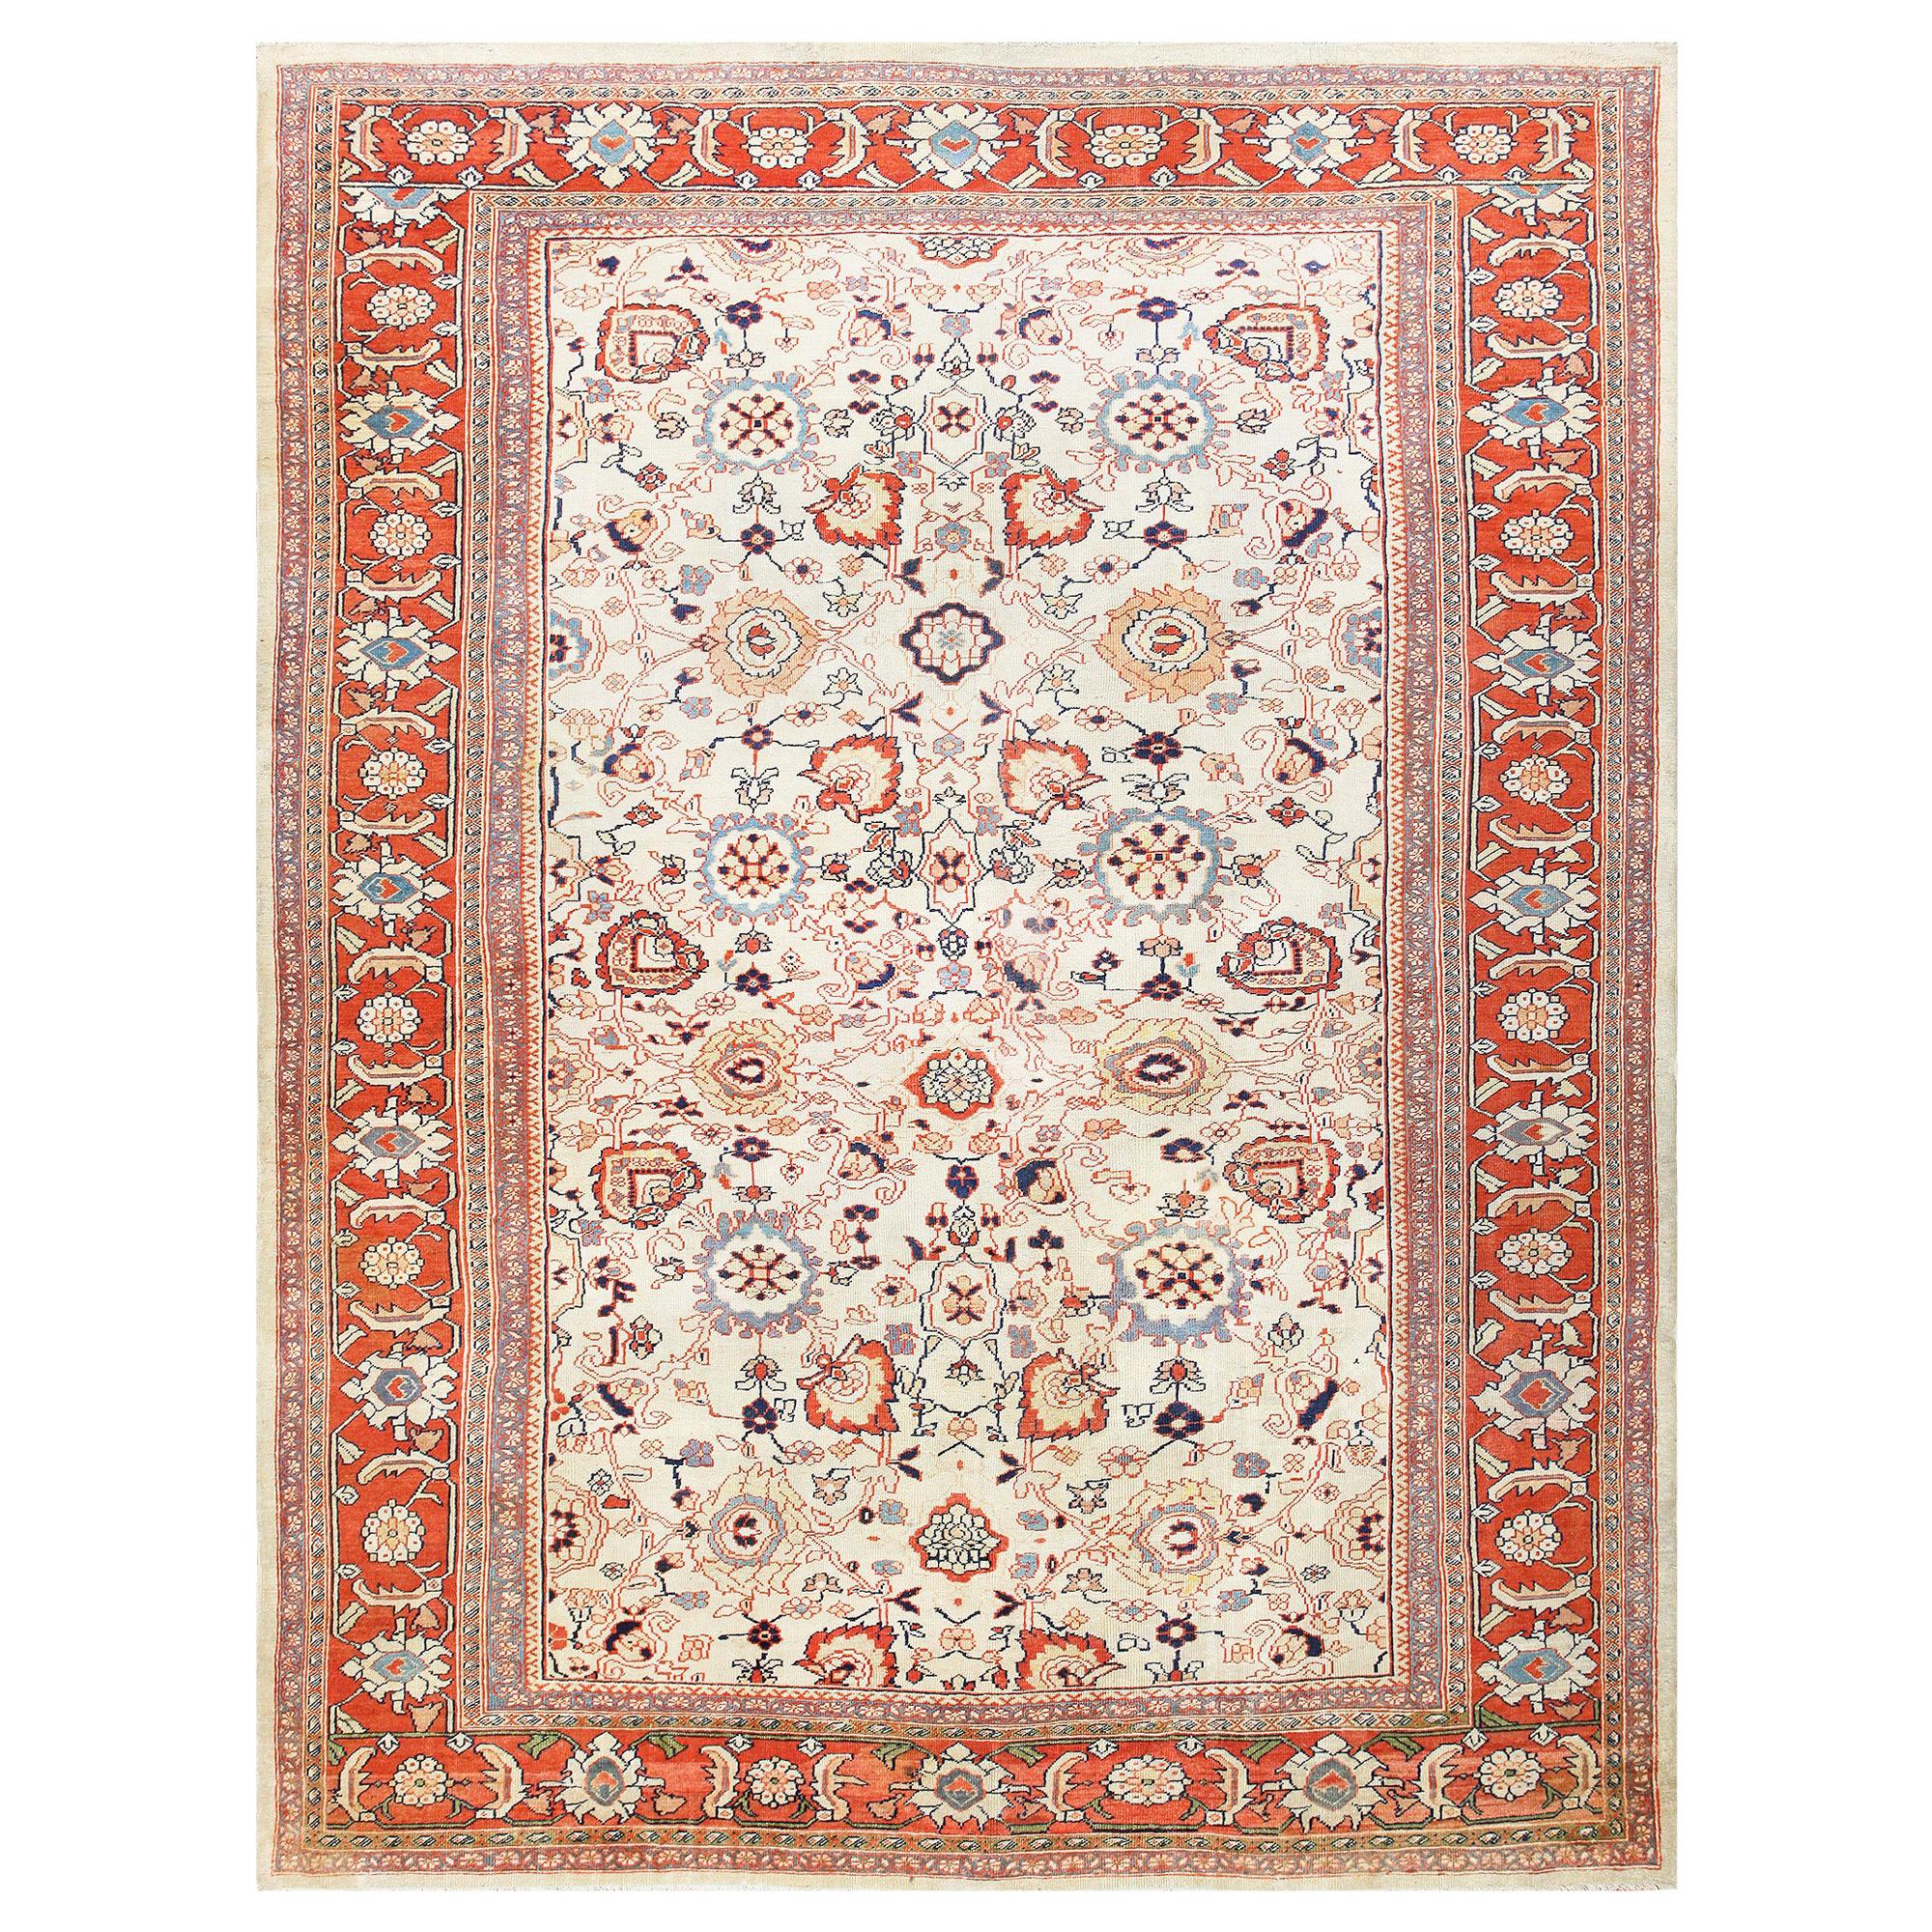 Nazmiyal Collection Antique Persian Sultanabad Rug. Size: 11' x 14' 4"